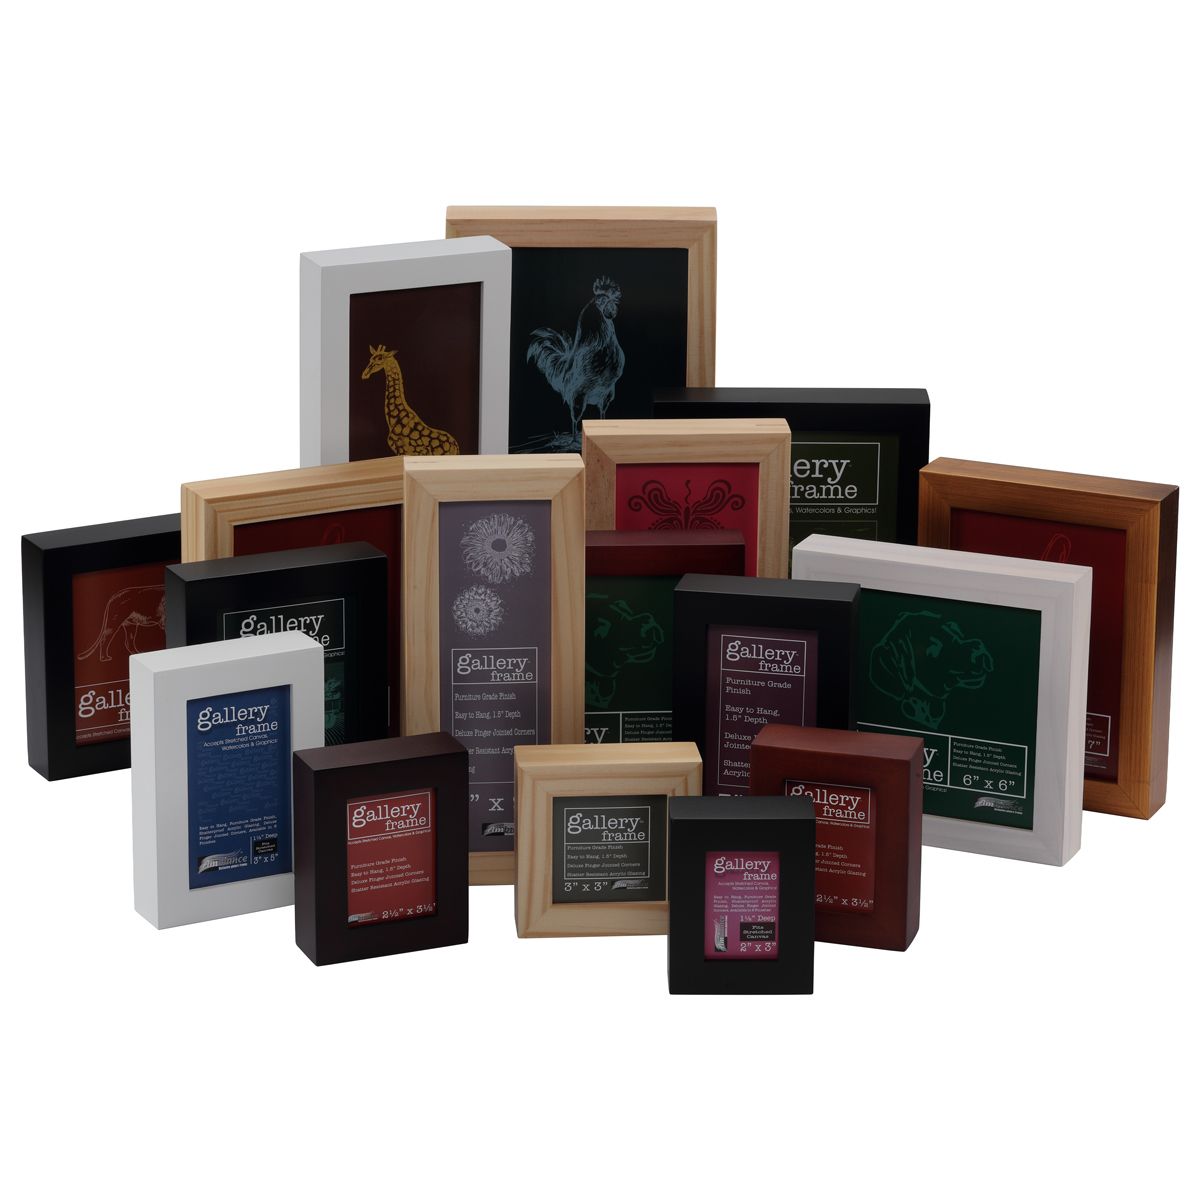 Ambiance Gallery Mini Sizes Wood Frames Boxes of 8